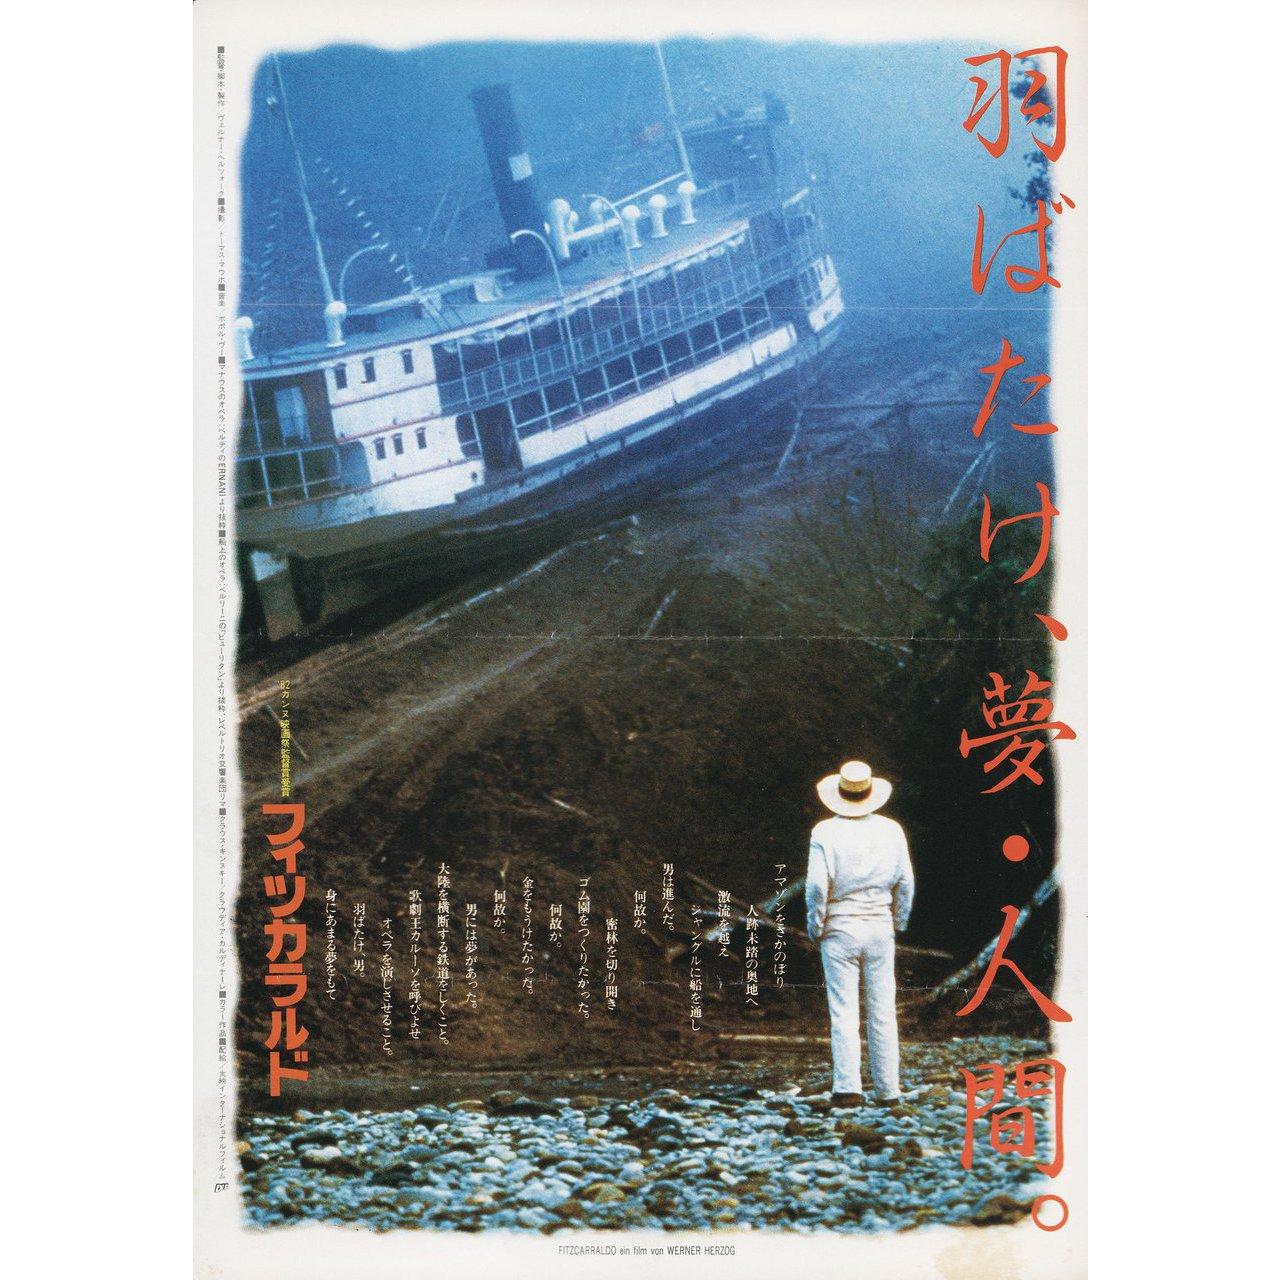 Original 1982 Japanese B5 chirashi flyer for the film Fitzcarraldo directed by Werner Herzog with Klaus Kinski / Claudia Cardinale / Jose Lewgoy / Miguel Angel Fuentes. Fine condition, folded. Many original posters were issued folded or were